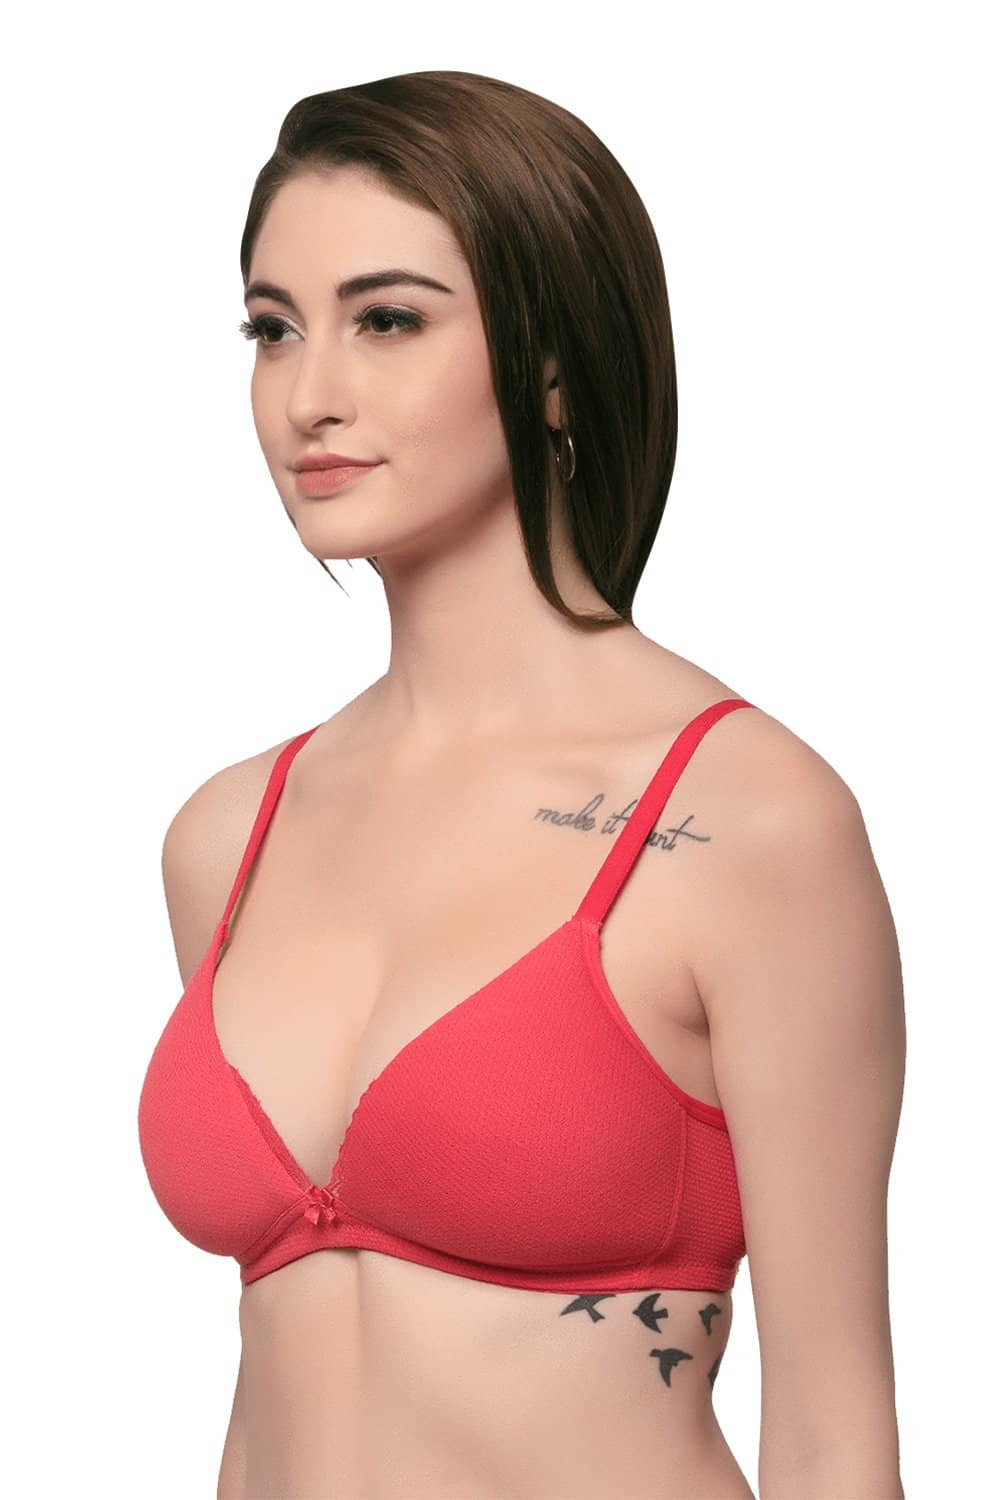 Organic Cotton  Antimicrobial Lace touch T-shirt Bra-ISB042-Bright Pink-